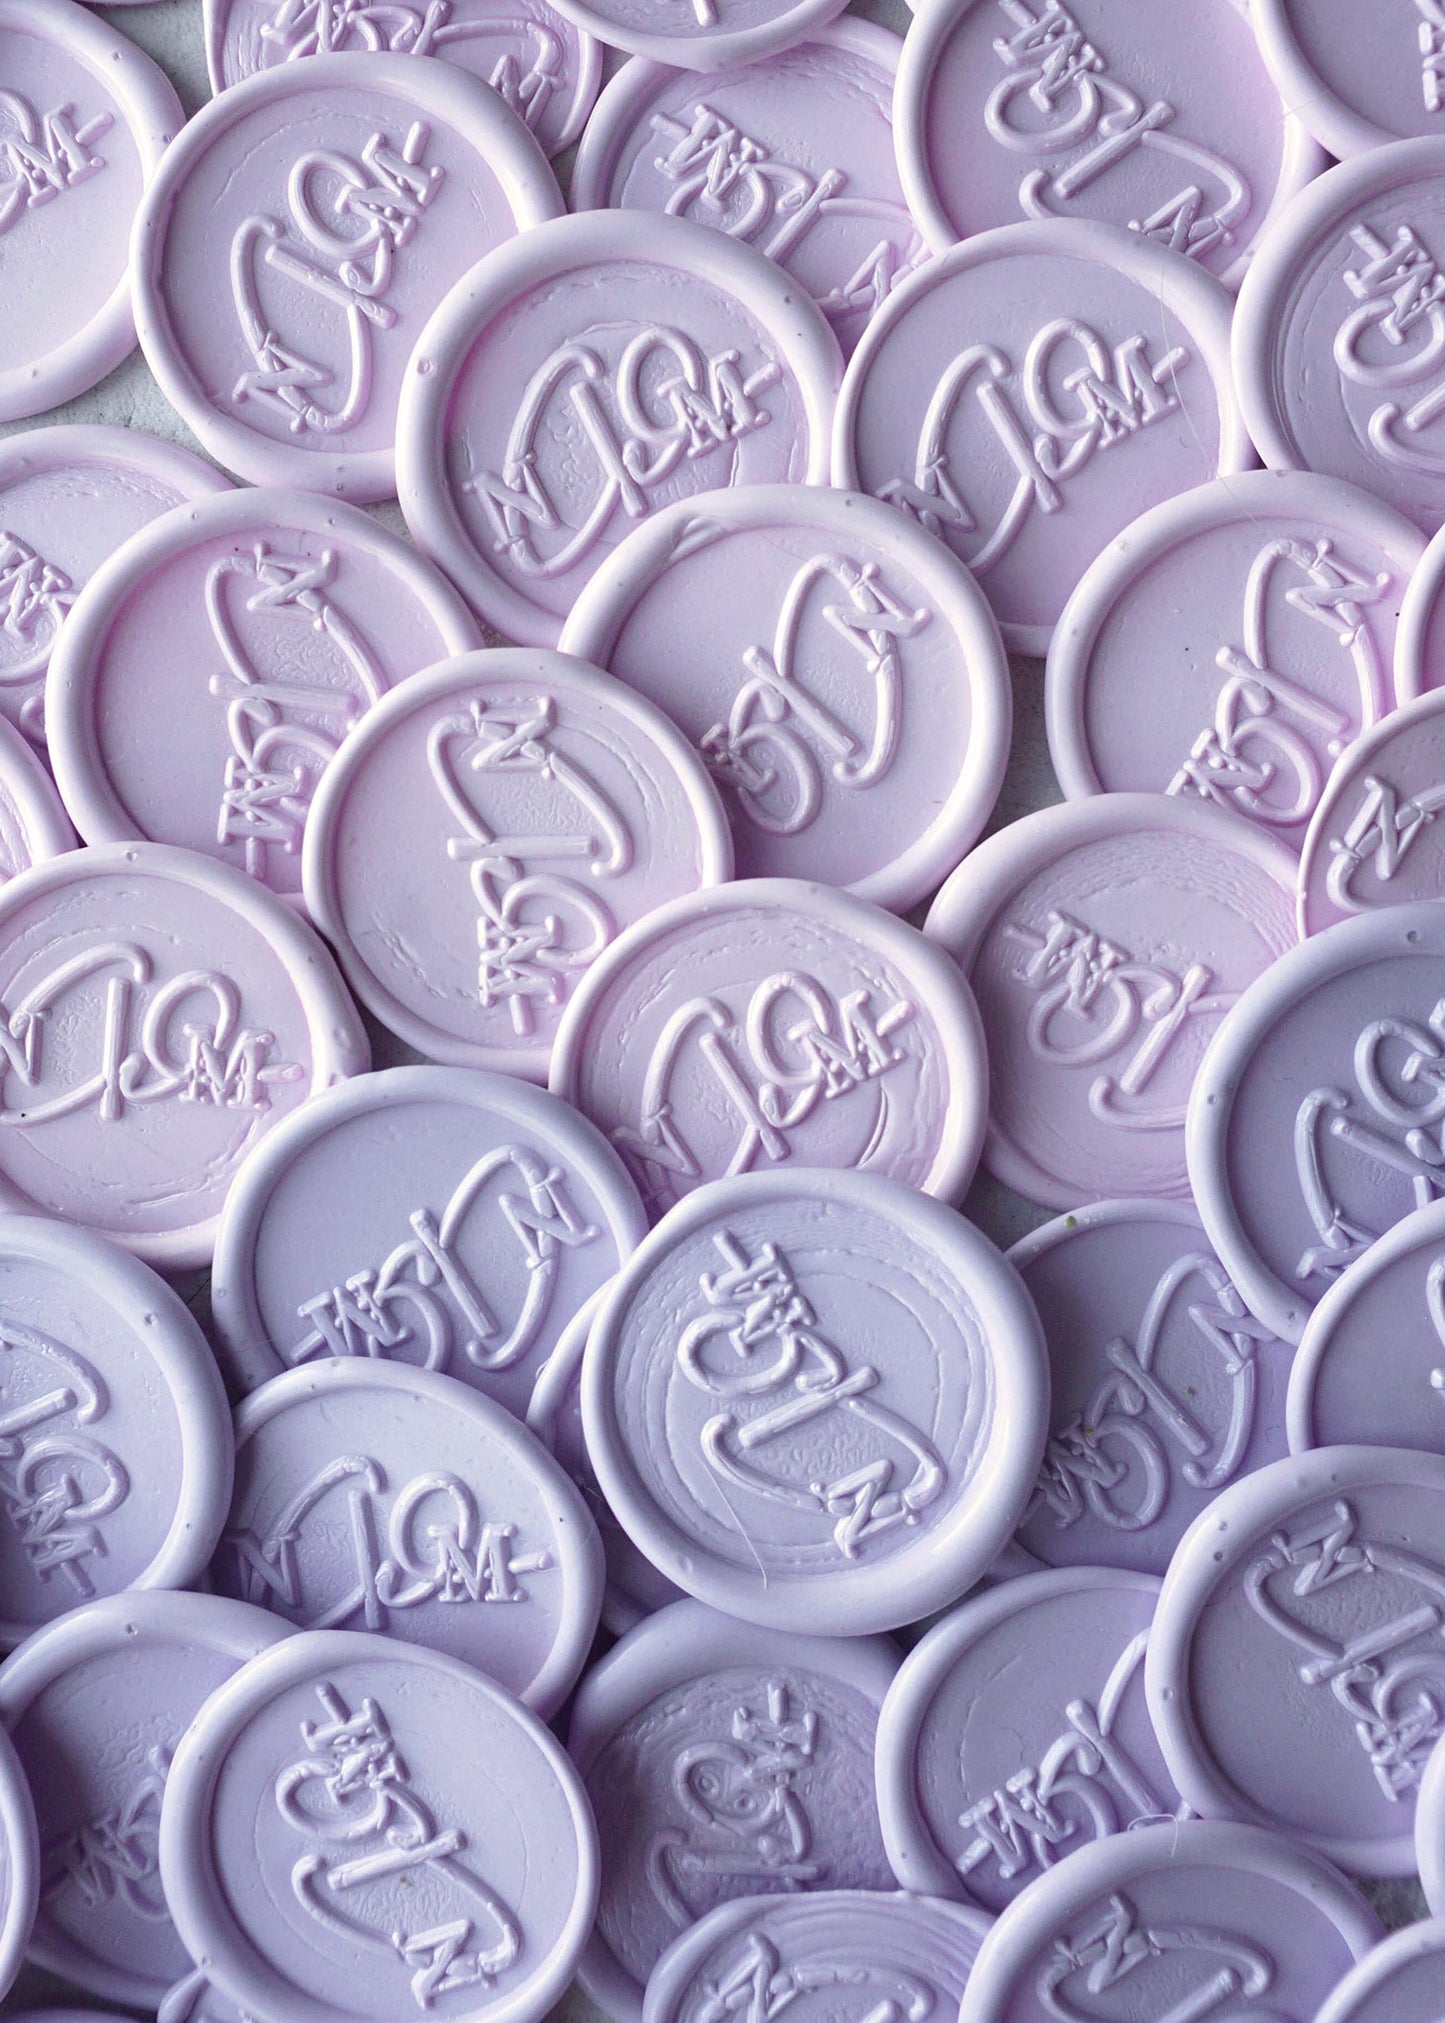 Shades of light pink and lilac wax seal stamps